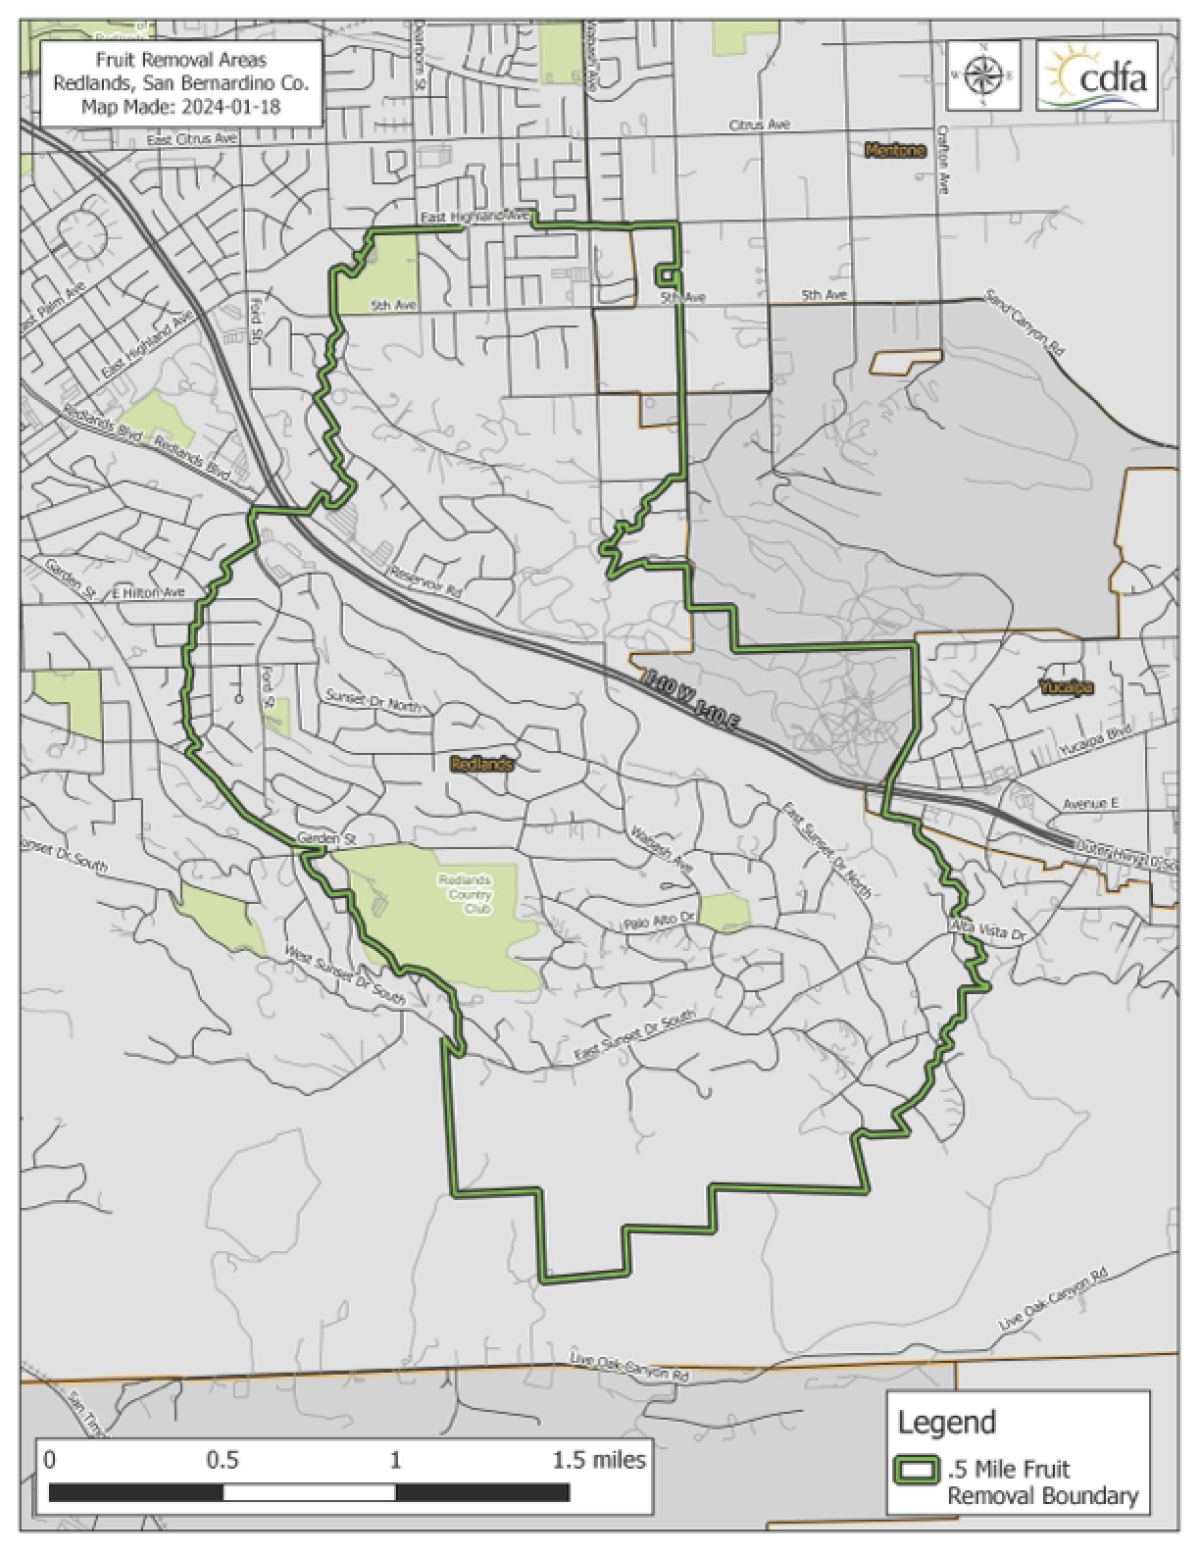 A sprawling area in Redlands will be quarantined to prevent the spread of the Oriental fruit fly.